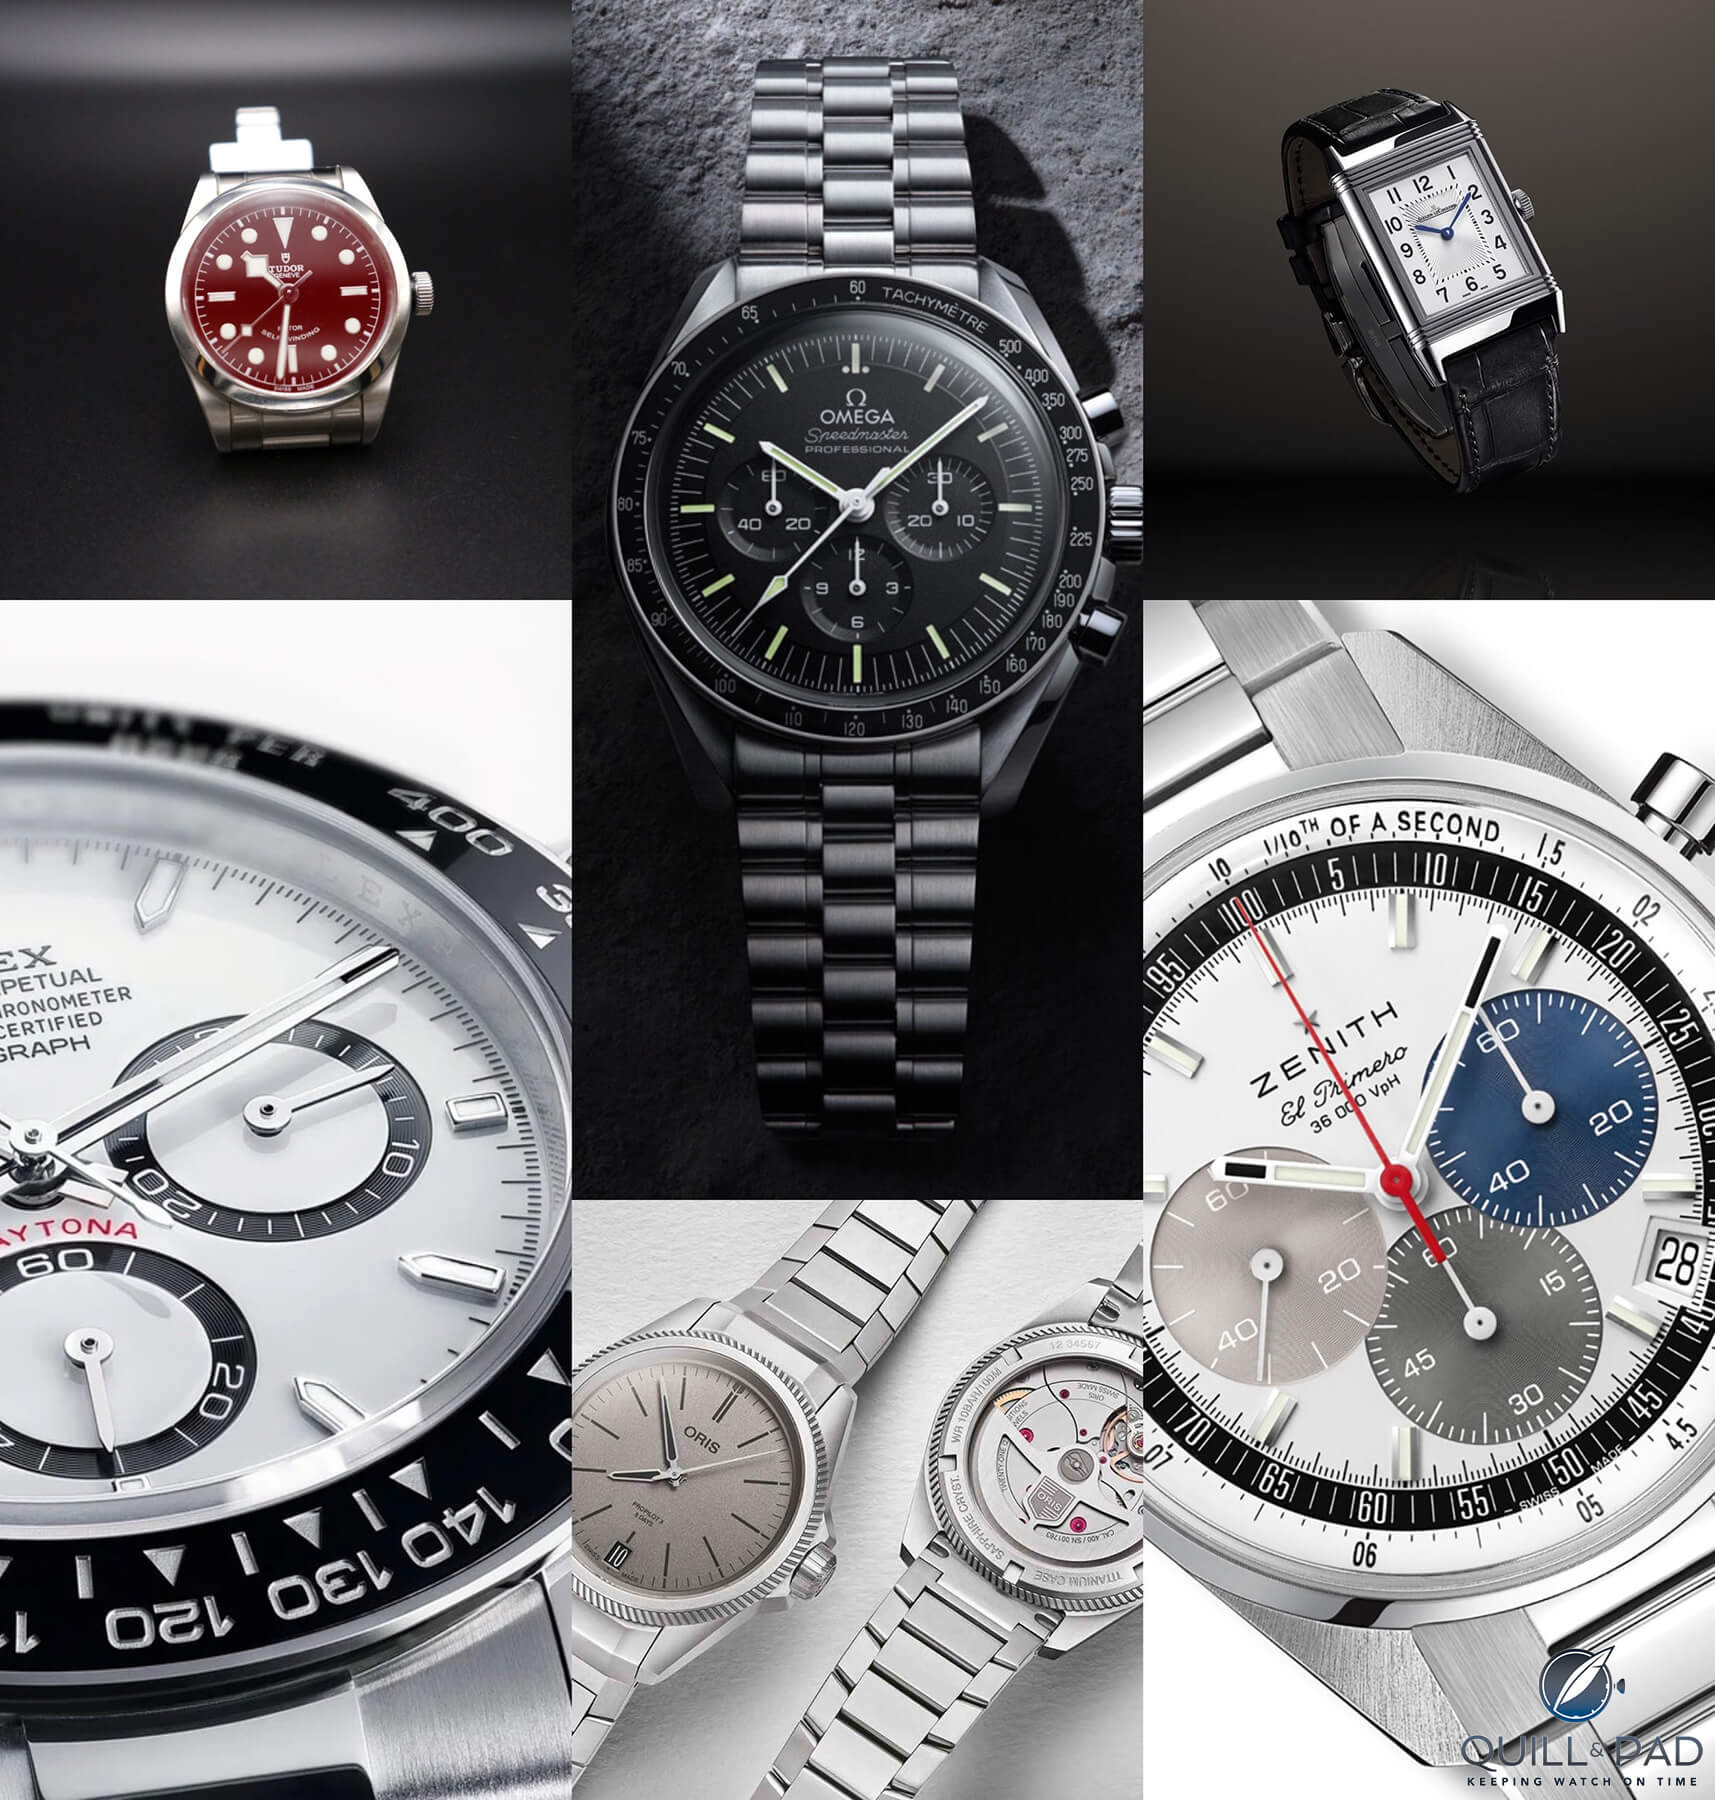 Swiss Watch Values Surge in U.S. for Brands Like Rolex, Omega and